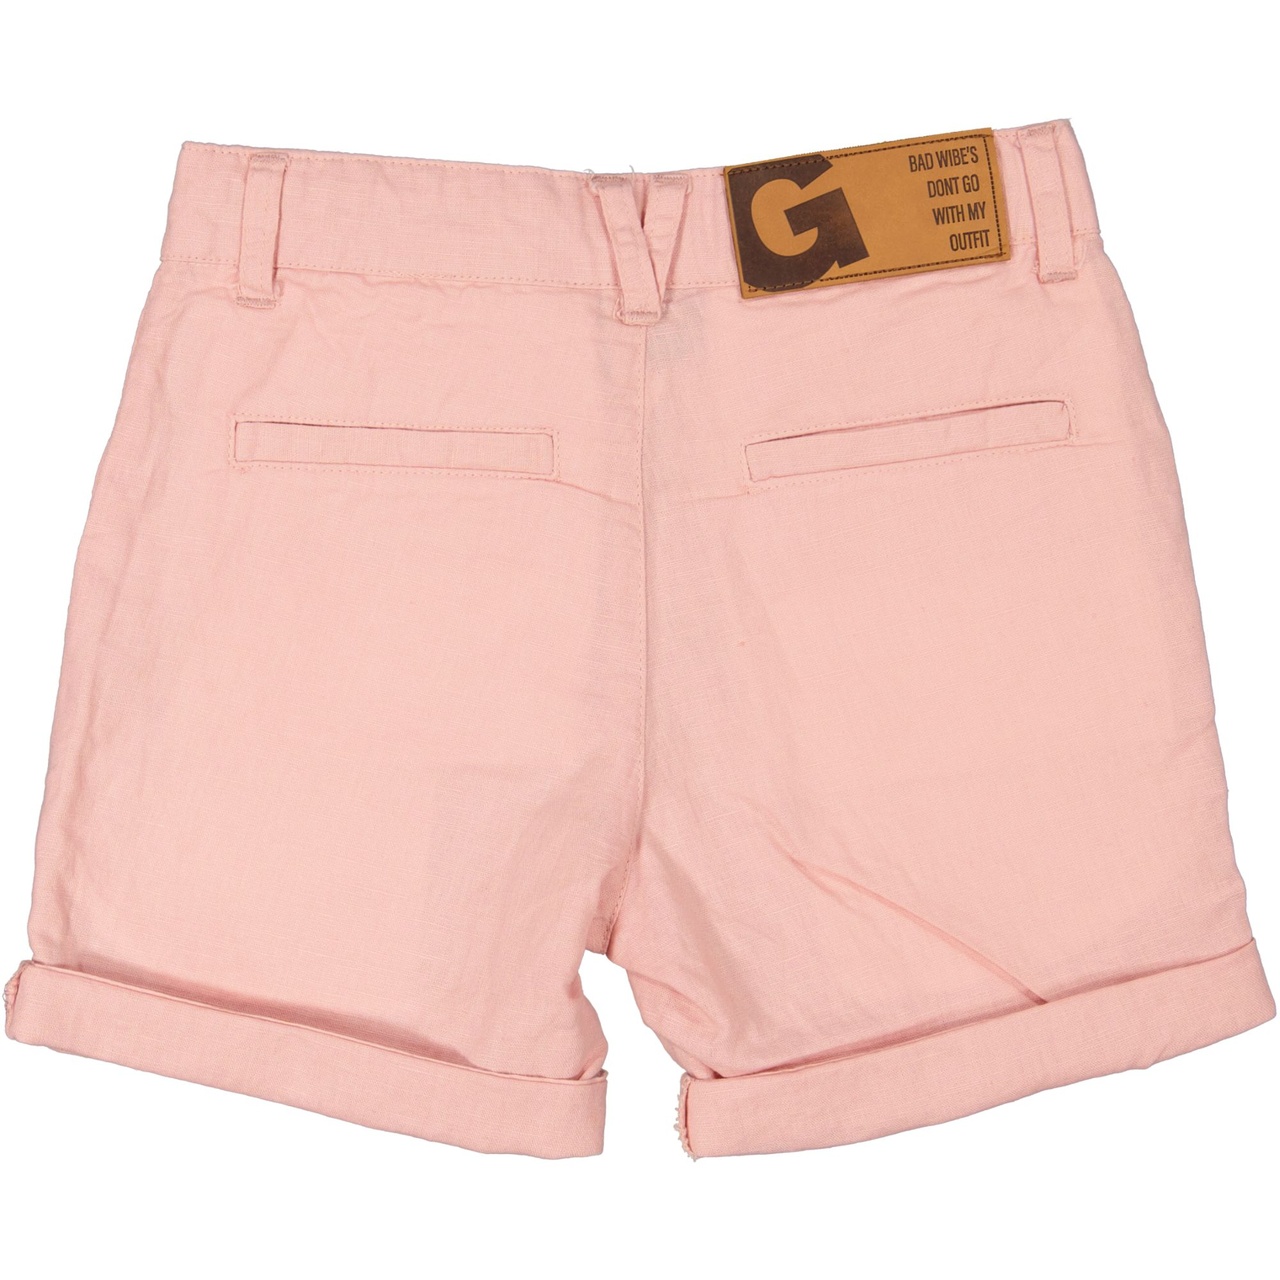 Linnen shorts Old pink 57